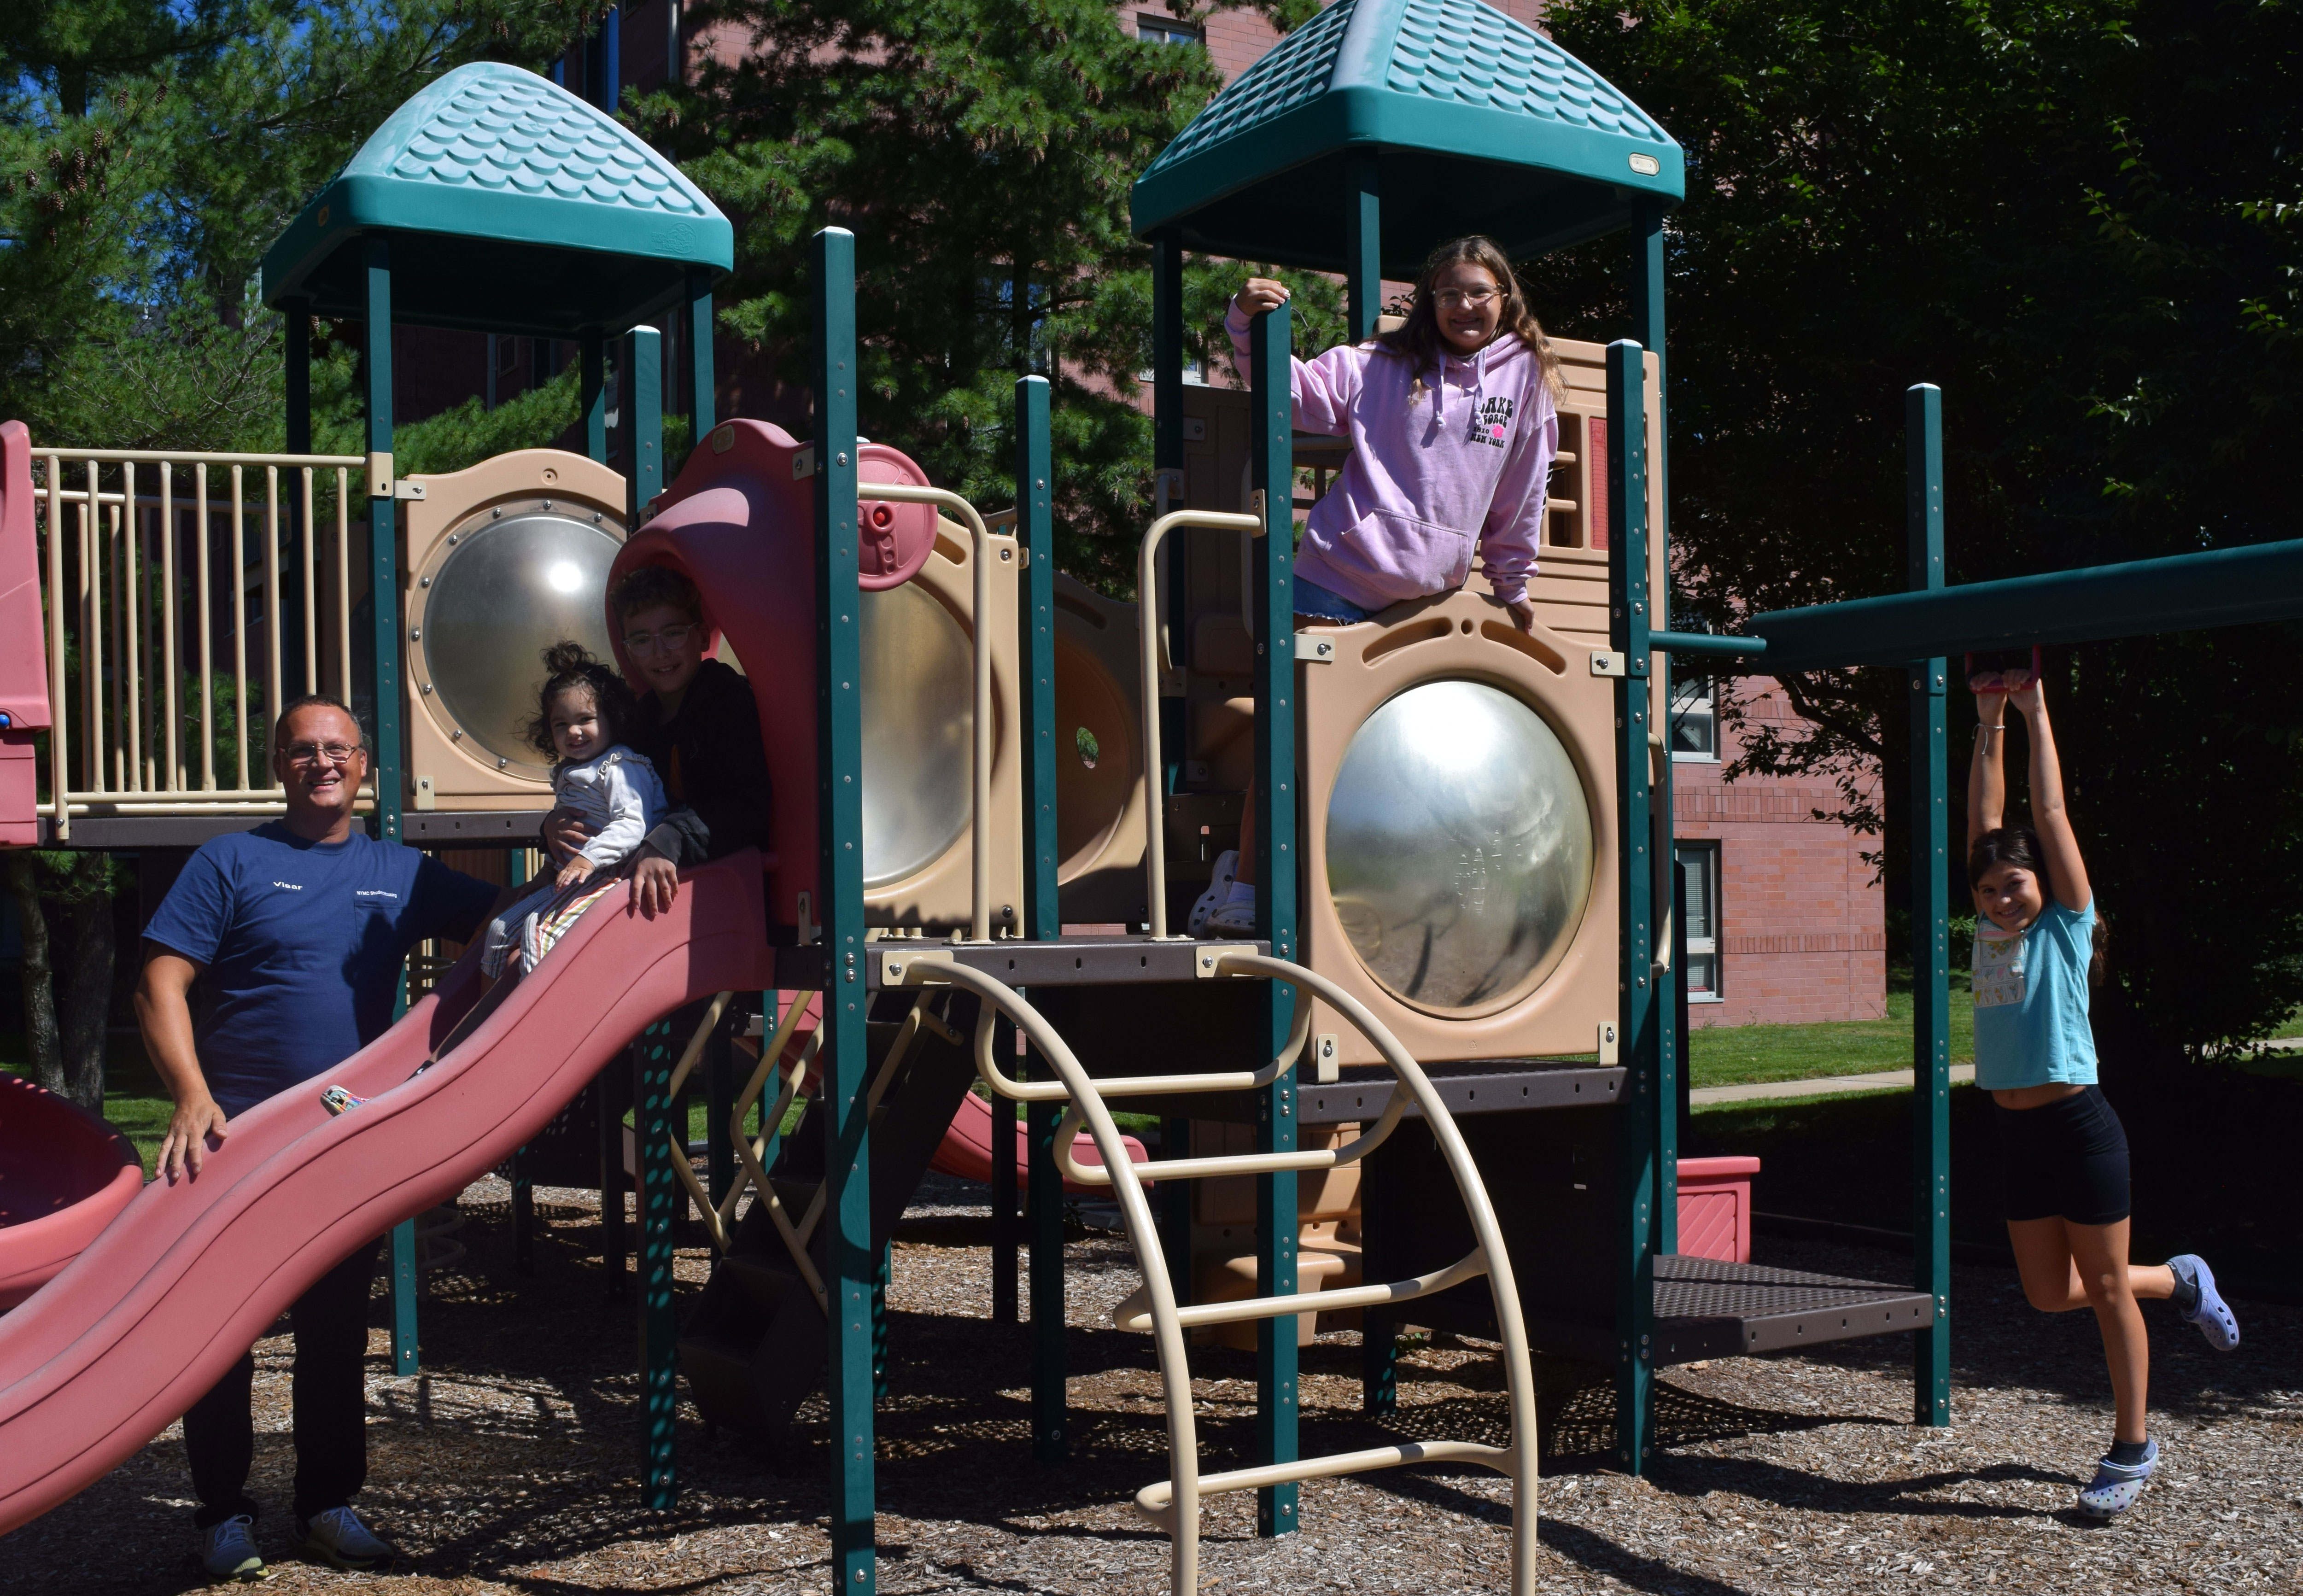 Man with children on a playground playing.